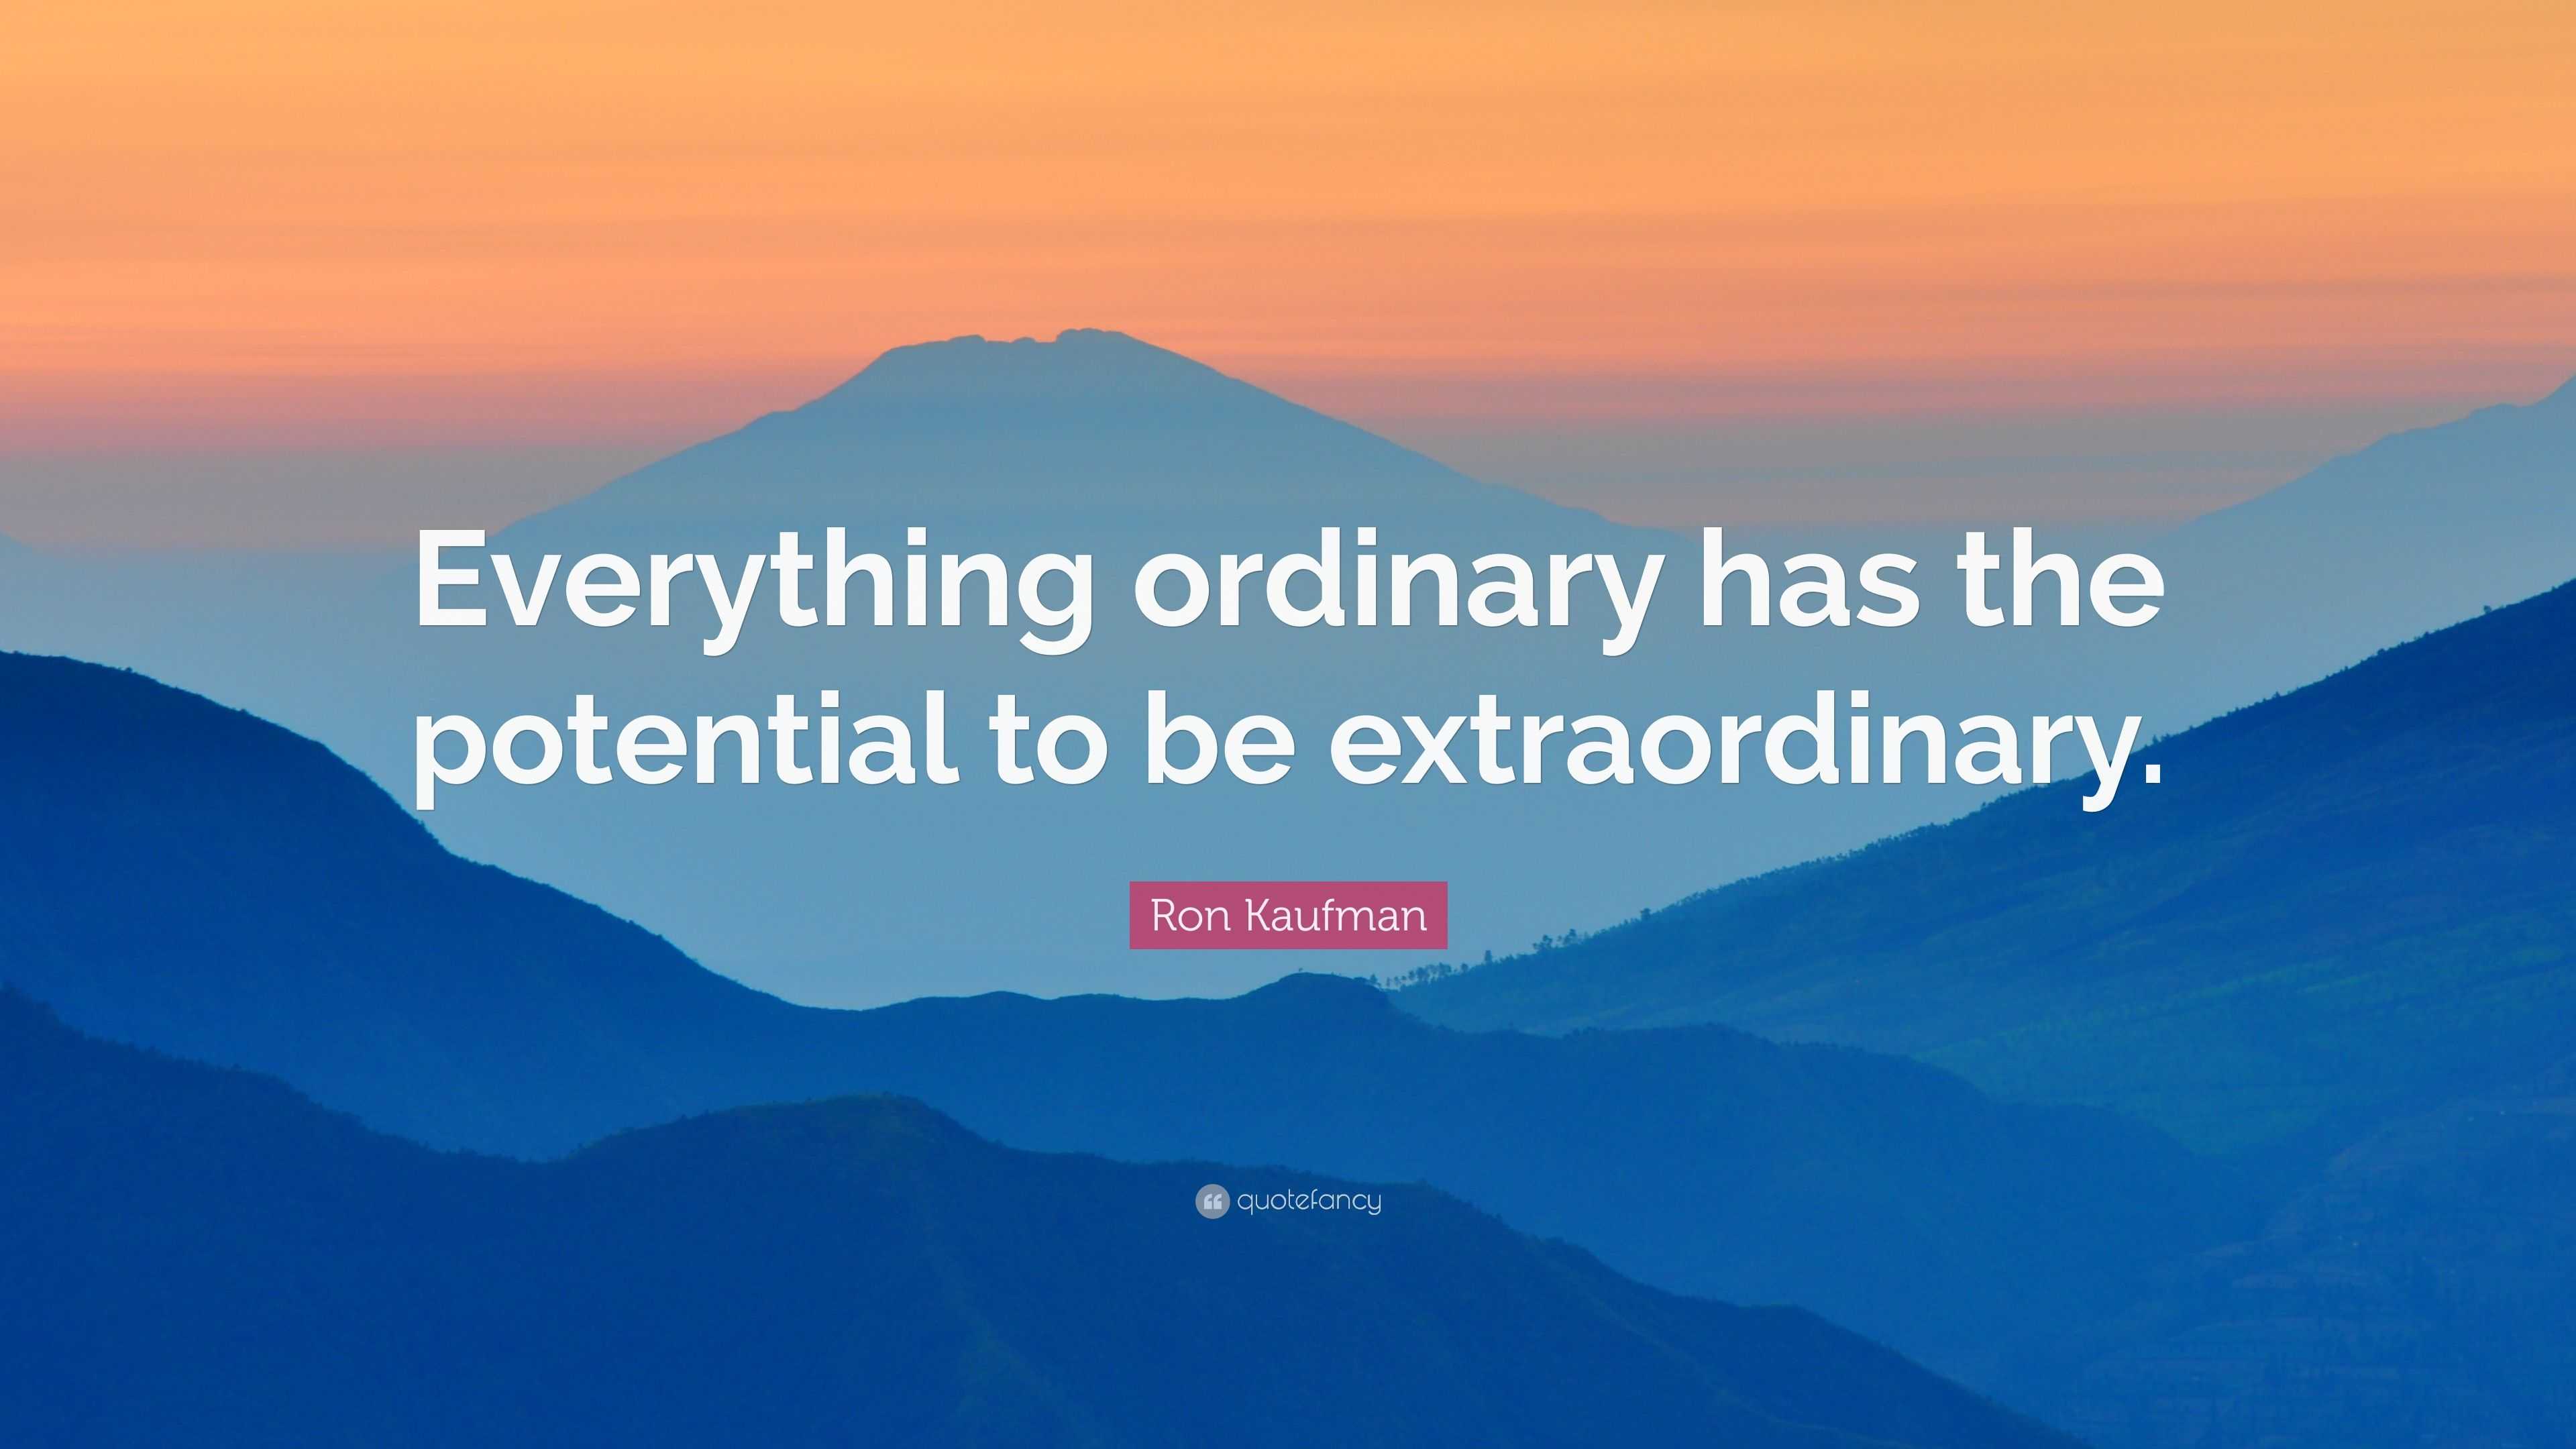 Ron Kaufman Quote “everything Ordinary Has The Potential To Be